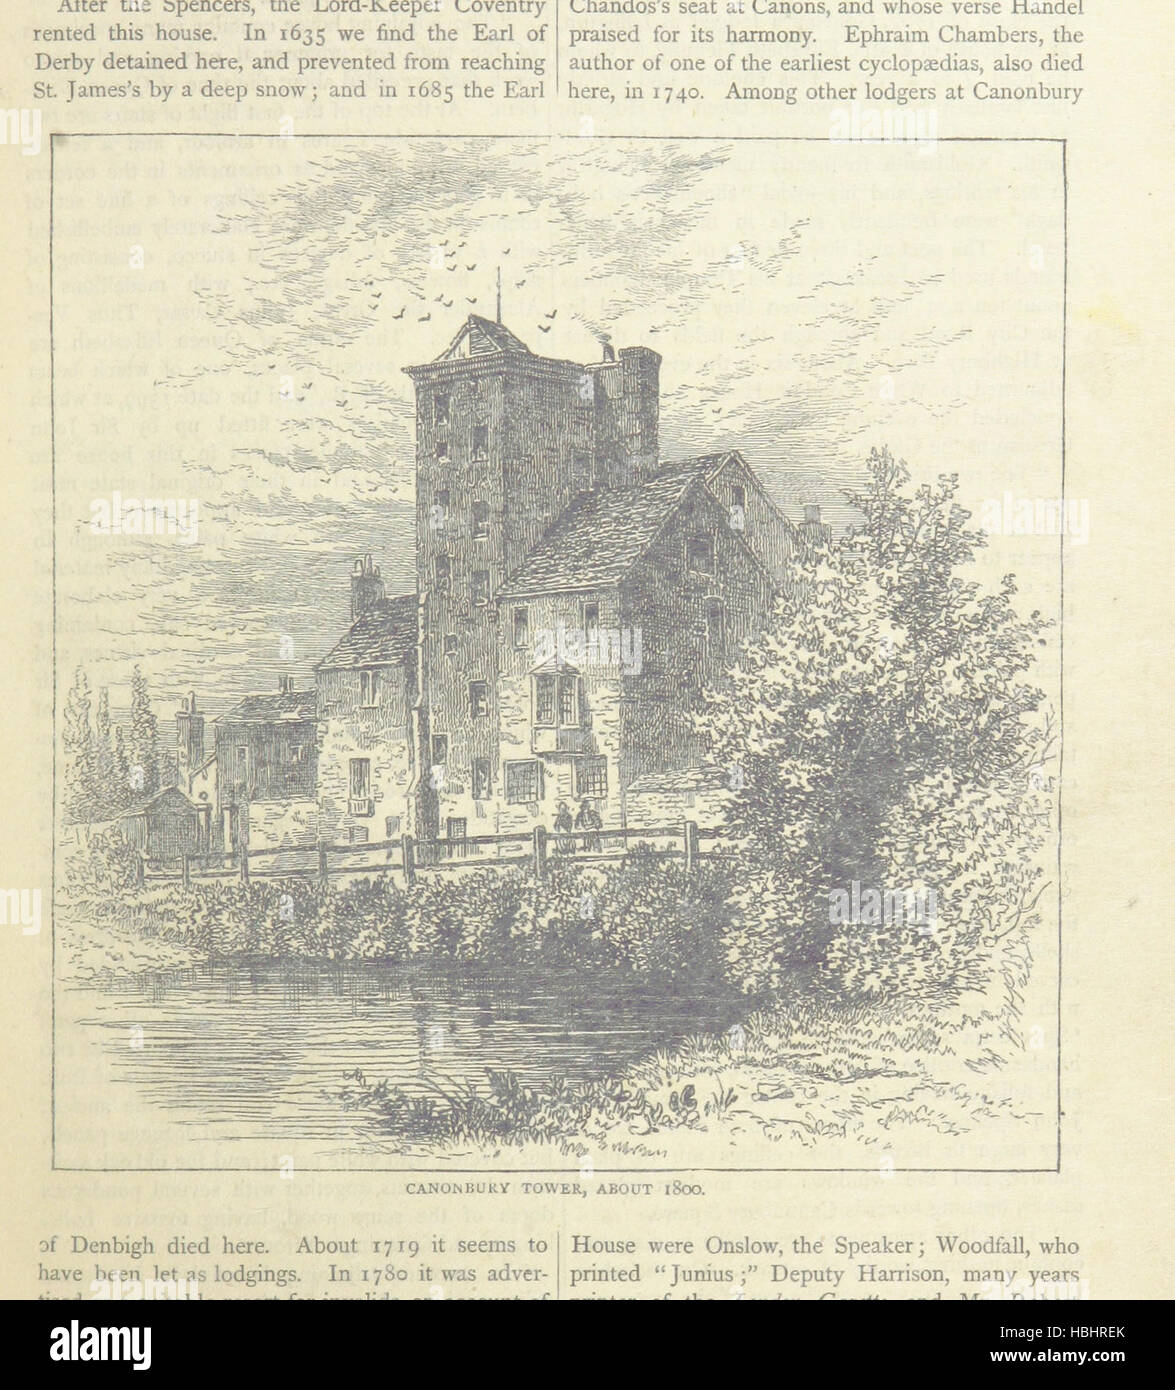 Image taken from page 293 of 'Old and New London; illustrated. A narrative of its history, its people, and its places. [vol. 1, 2,] by Walter Thornbury (vol. 3-6, by E. Walford)' Image taken from page 293 of 'Old and New London; Stock Photo